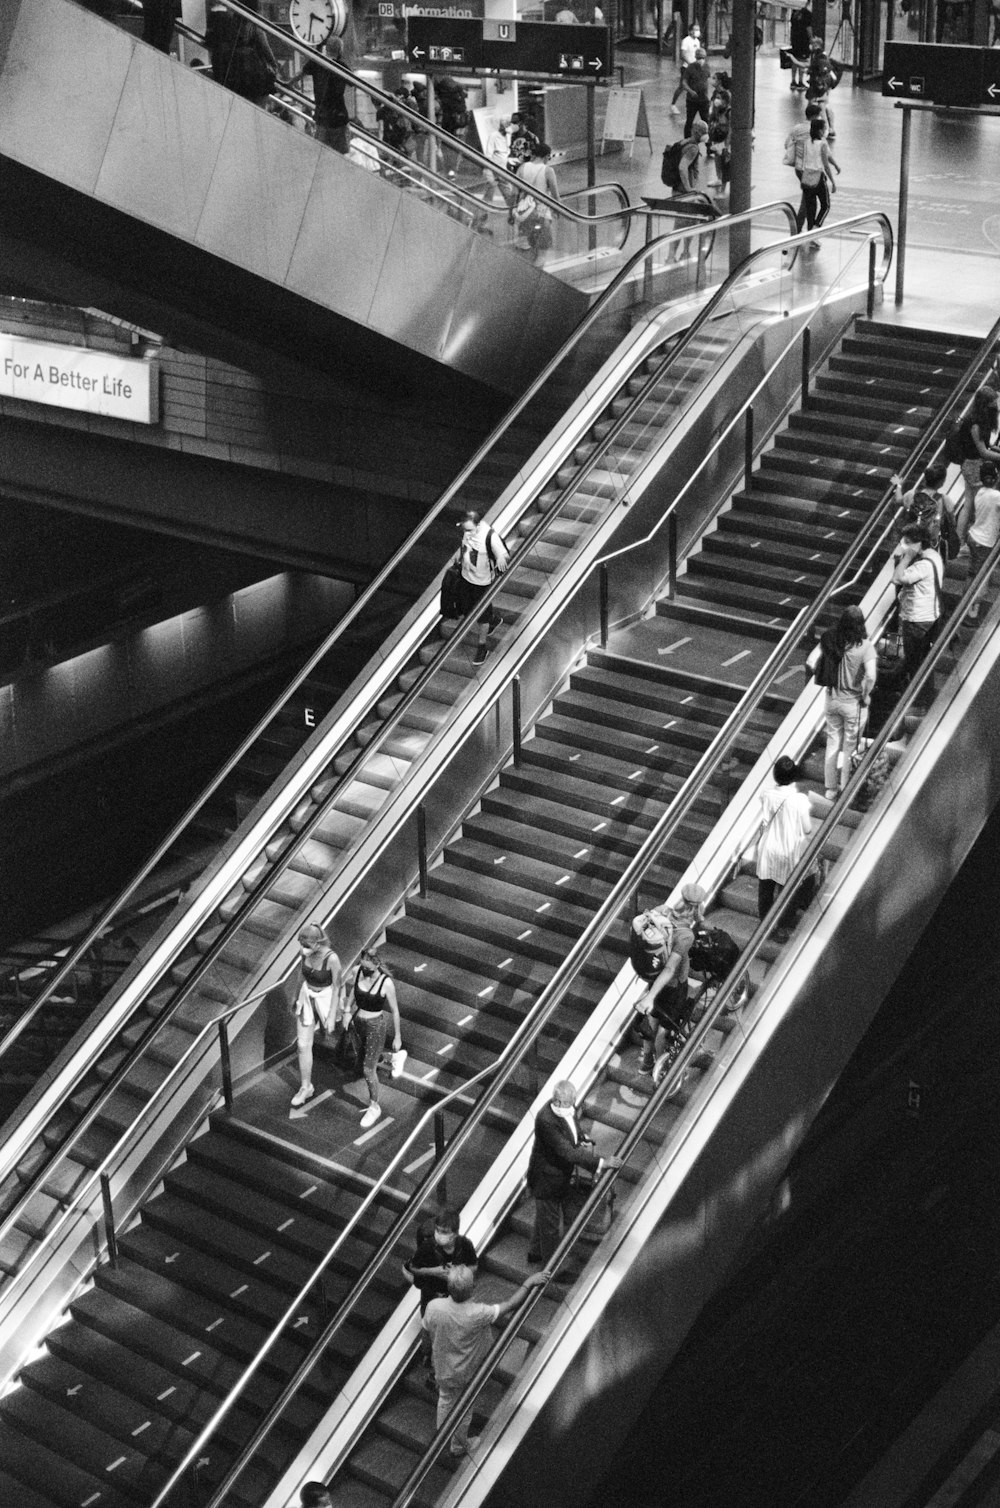 a black and white photo of people on an escalator